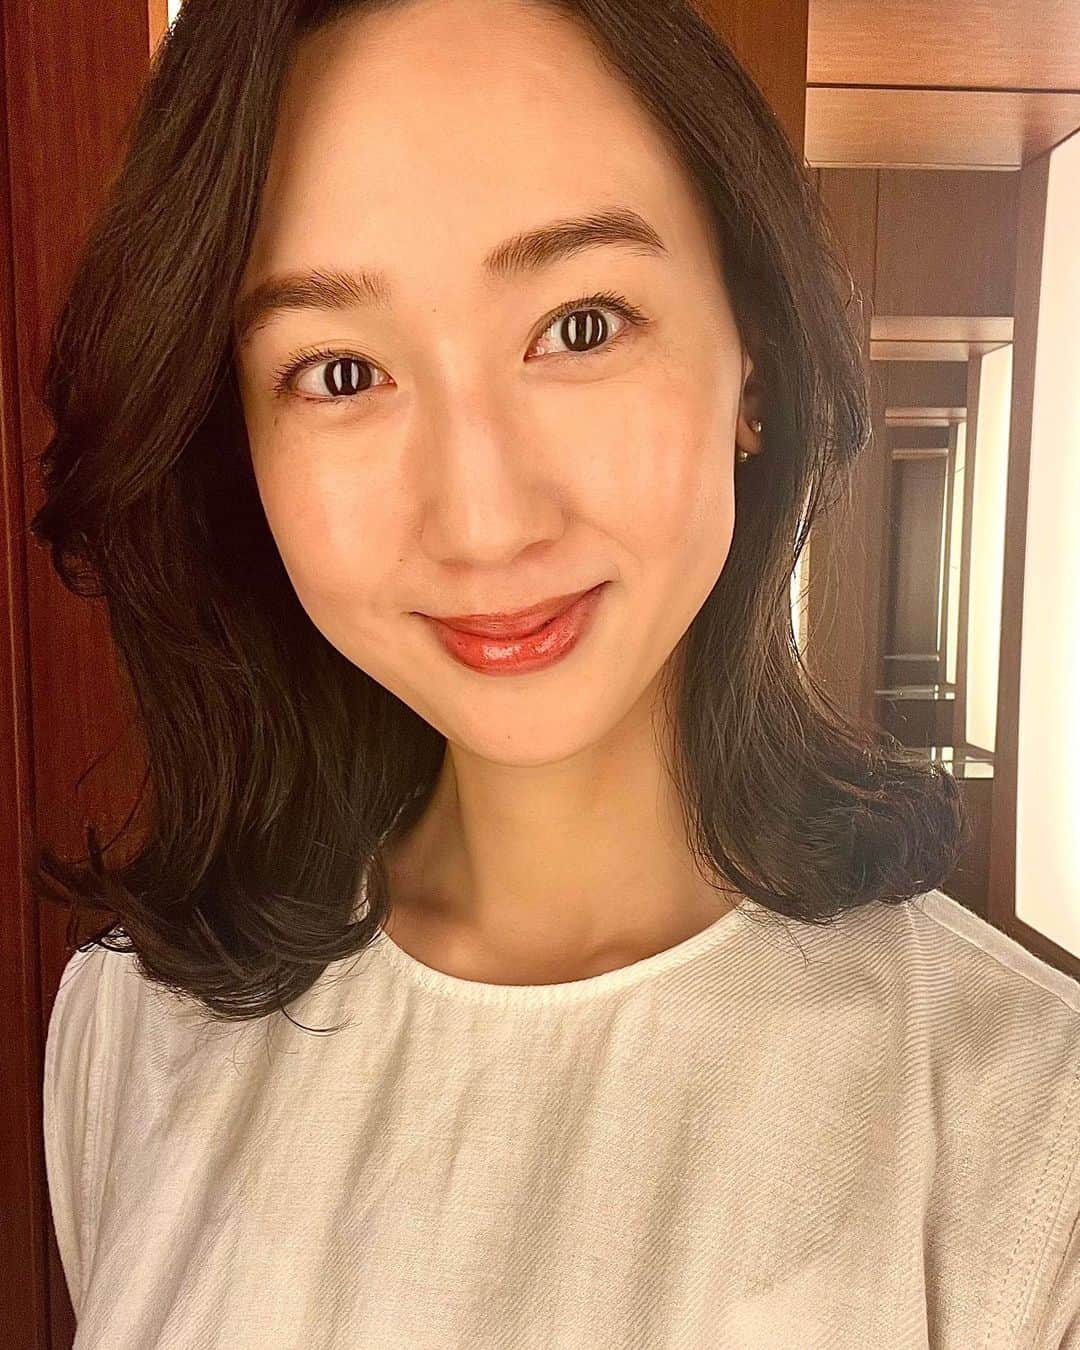 松原汐織のインスタグラム：「I've been interested in beauty more and more since I came back to Japan. My beautiful friends taught me a lot of beauty tips. I enjoy trying new skincare items. I especially recommend @drunkelephant . It’s easy to use all serums and cream mix like a smoothie.  Also, I have got new undamaged hair @yuumakiiii . Length and colour are a little bit different from before.  Anyway, I want to know about the beauty tips you recommend❤️ ・ ・ 日本に帰ってきてから美容熱上昇🔥(というより、悪阻＆産後のバタバタ期間中は何もできずサボったツケが回ってきて、どうにかせねば！という感じです🥲)  美容通の友達が勧めてくれたものを試すのが楽しくて🤭 好みだったのが @drunkelephant 🐘 ピーリング効果があるセラムなどをクリームと一緒に全部一緒に混ぜて使えるという手軽さが最高！肌がちゅるんと整う感じがします🫶🏻  硬水で傷んで色落ちした髪はGarland表参道 @yuumakiiii さんにカット＆毛先を中心にカラーしていただいて、蘇りました❤️  ヨーロッパに戻ったら、またバタバタの生活が待っているので、スッピン力を向上したいです🫡 色々試したいので、オススメ教えてください〜💕  ——— Outfit Details: Dress @massimodutti  Bag @newbottega  Sandals @hermes  ———  #baby #babygirl #5monthsold #mumofagirl #lovemyfam  #beautytips #drunkelephant  #出産 #海外出産 #女の子ママ  #海外子育て #イギリス子育て #ロンドン子育て  #一時帰国 #スキンケア #ドランクエレファント #美容院 #garland表参道」